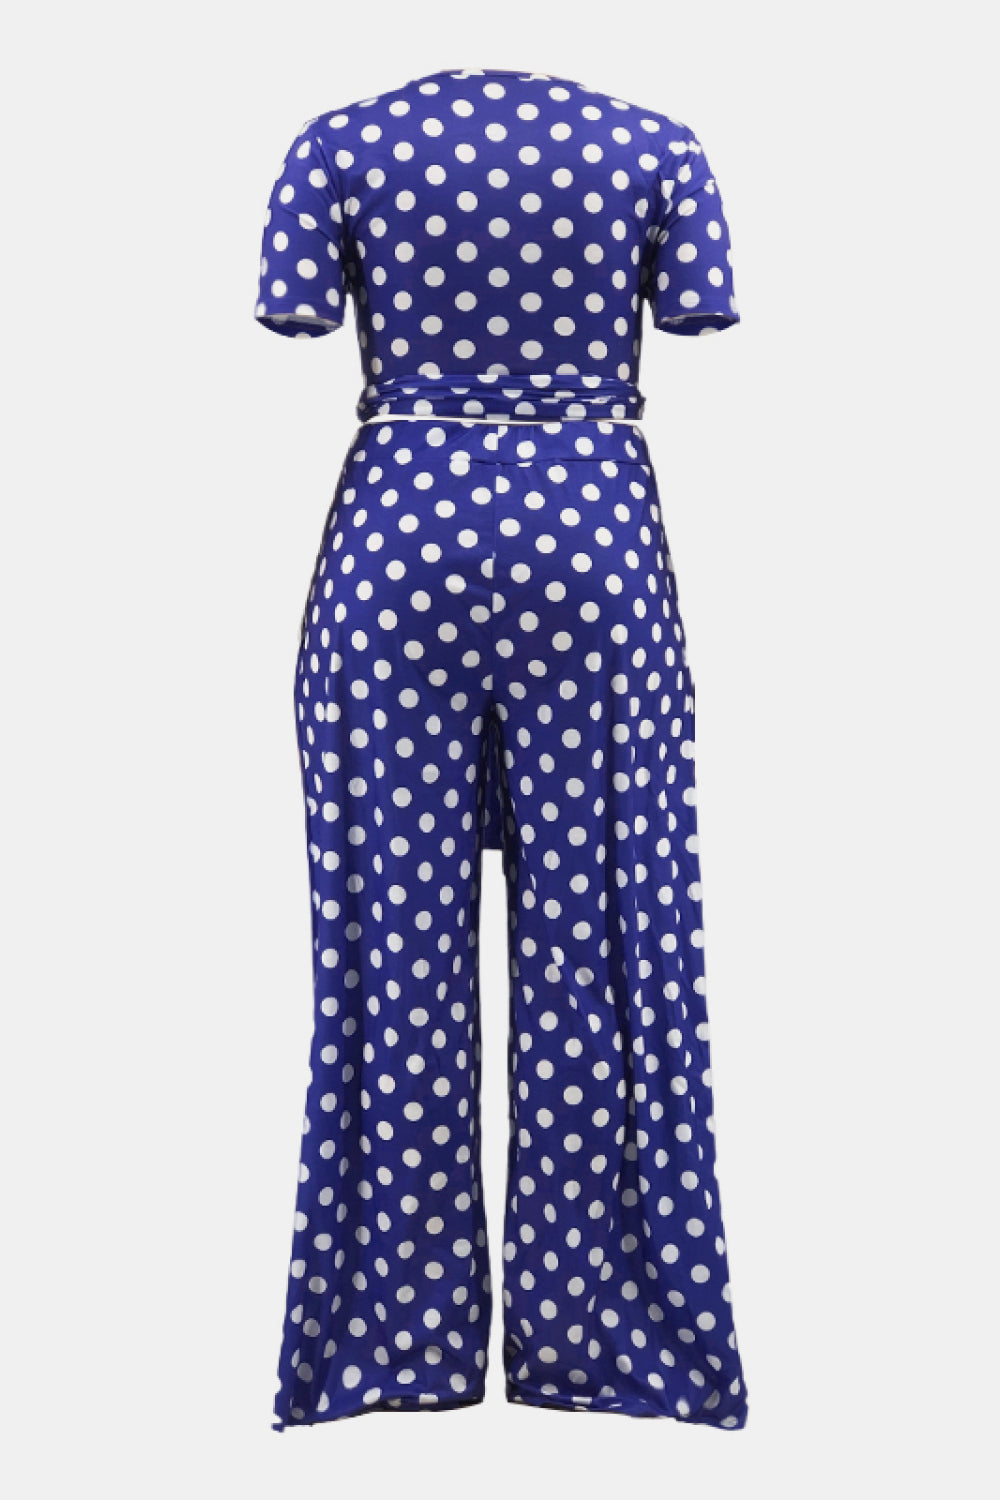 Plus Size Polka Dot Short Sleeve Top and Wide Leg Pants Set - Outlets Forever